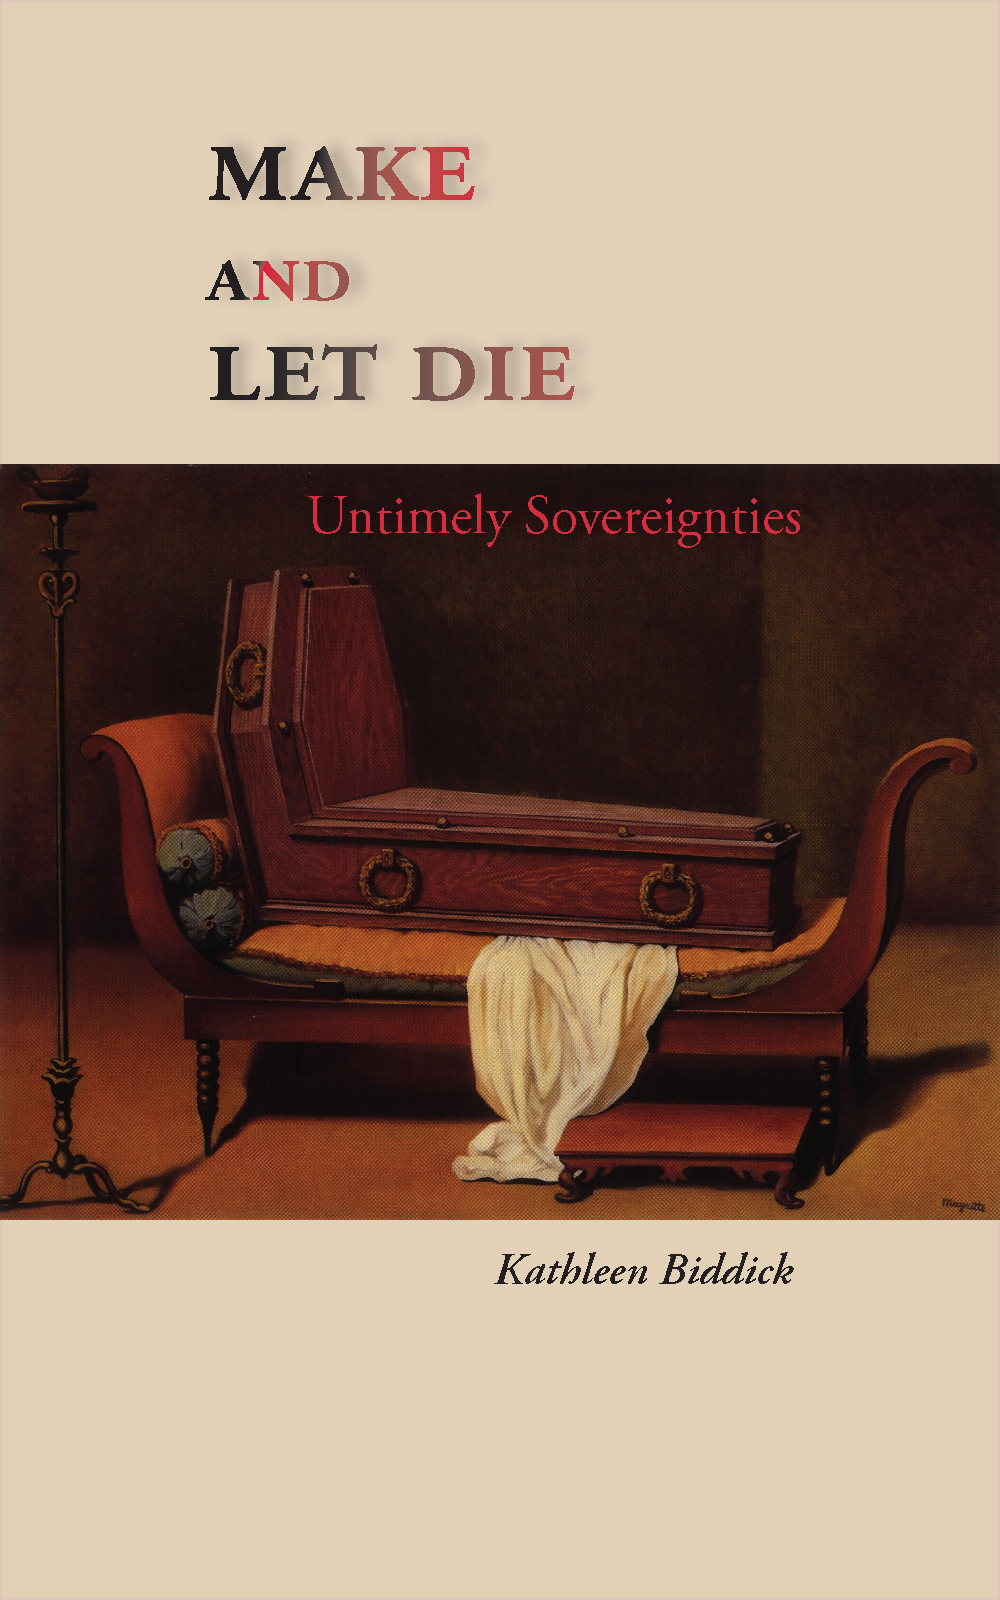 Make and Let Die: Untimely Sovereignties (punctum books, 2016)